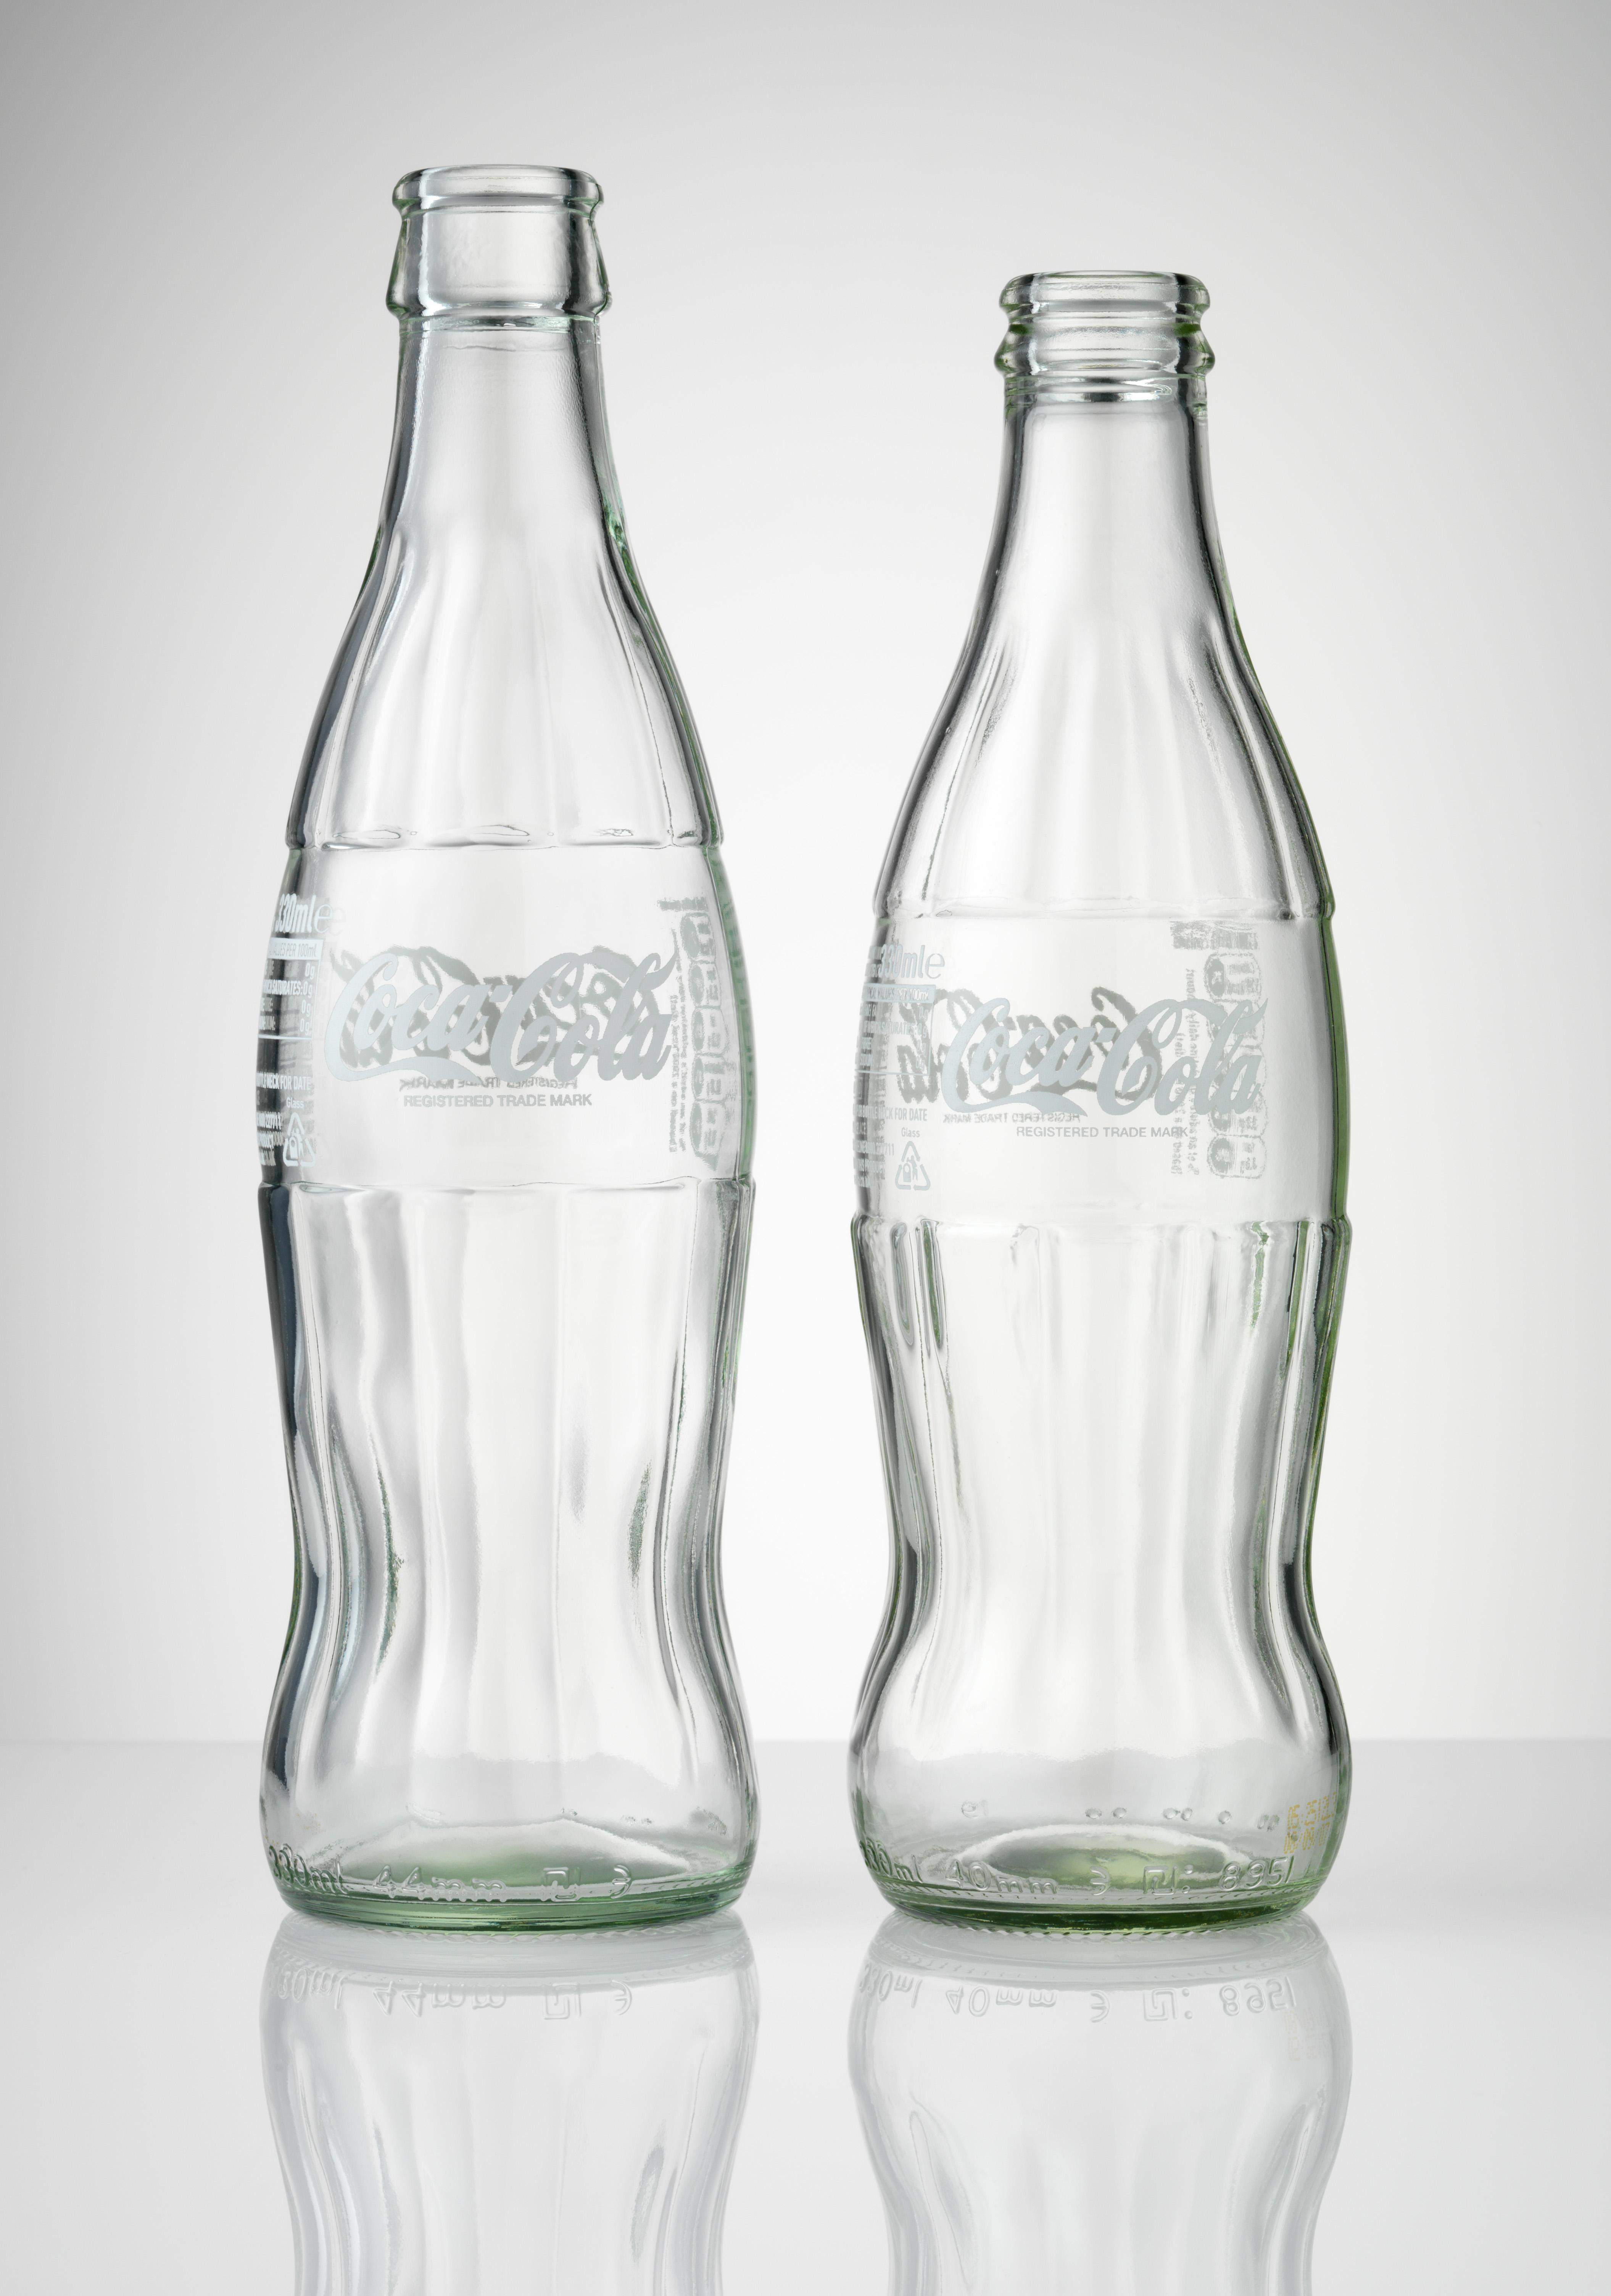 Famous Coke “Contour” bottle loses weight in time for Christmas